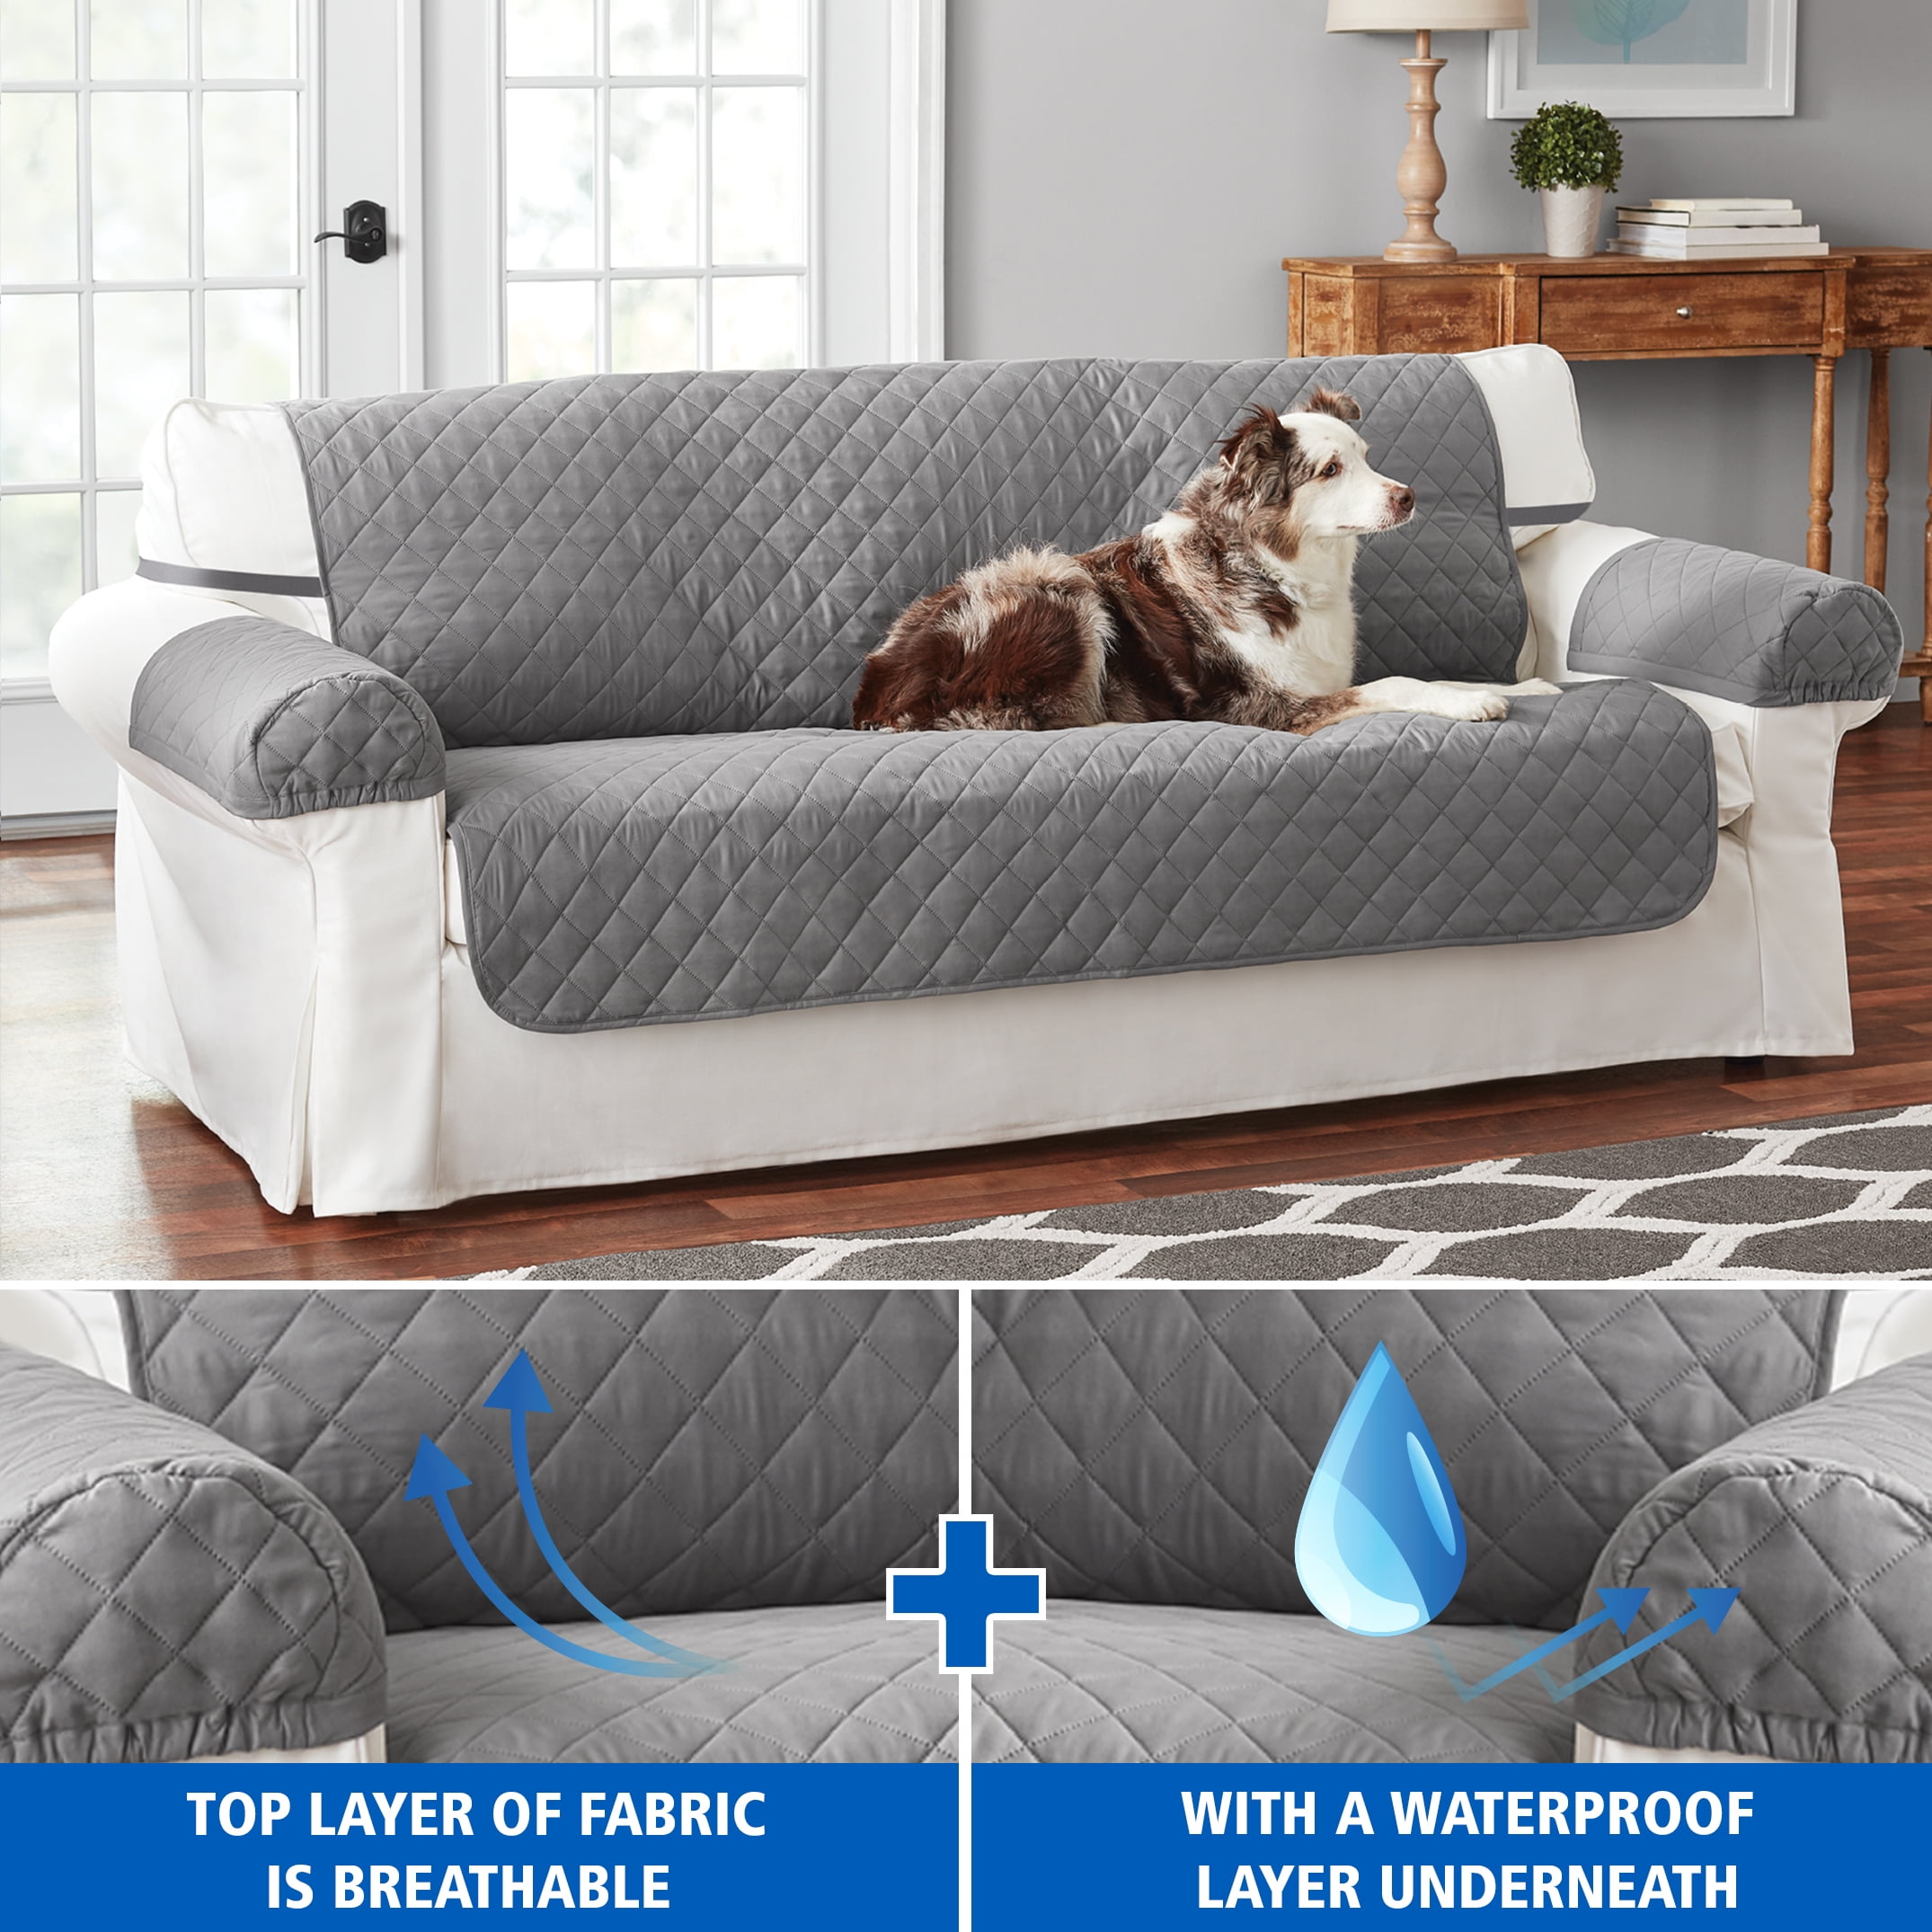  TOMORO Non-Slip Sofa Slipcover - 100% Waterproof Quilted Sofa  Cover Furniture Protector with 5 Storage Pockets, Washable Couch Cover with  Elastic Straps for Dog, Fit Seat Width Up to 68 Inch 